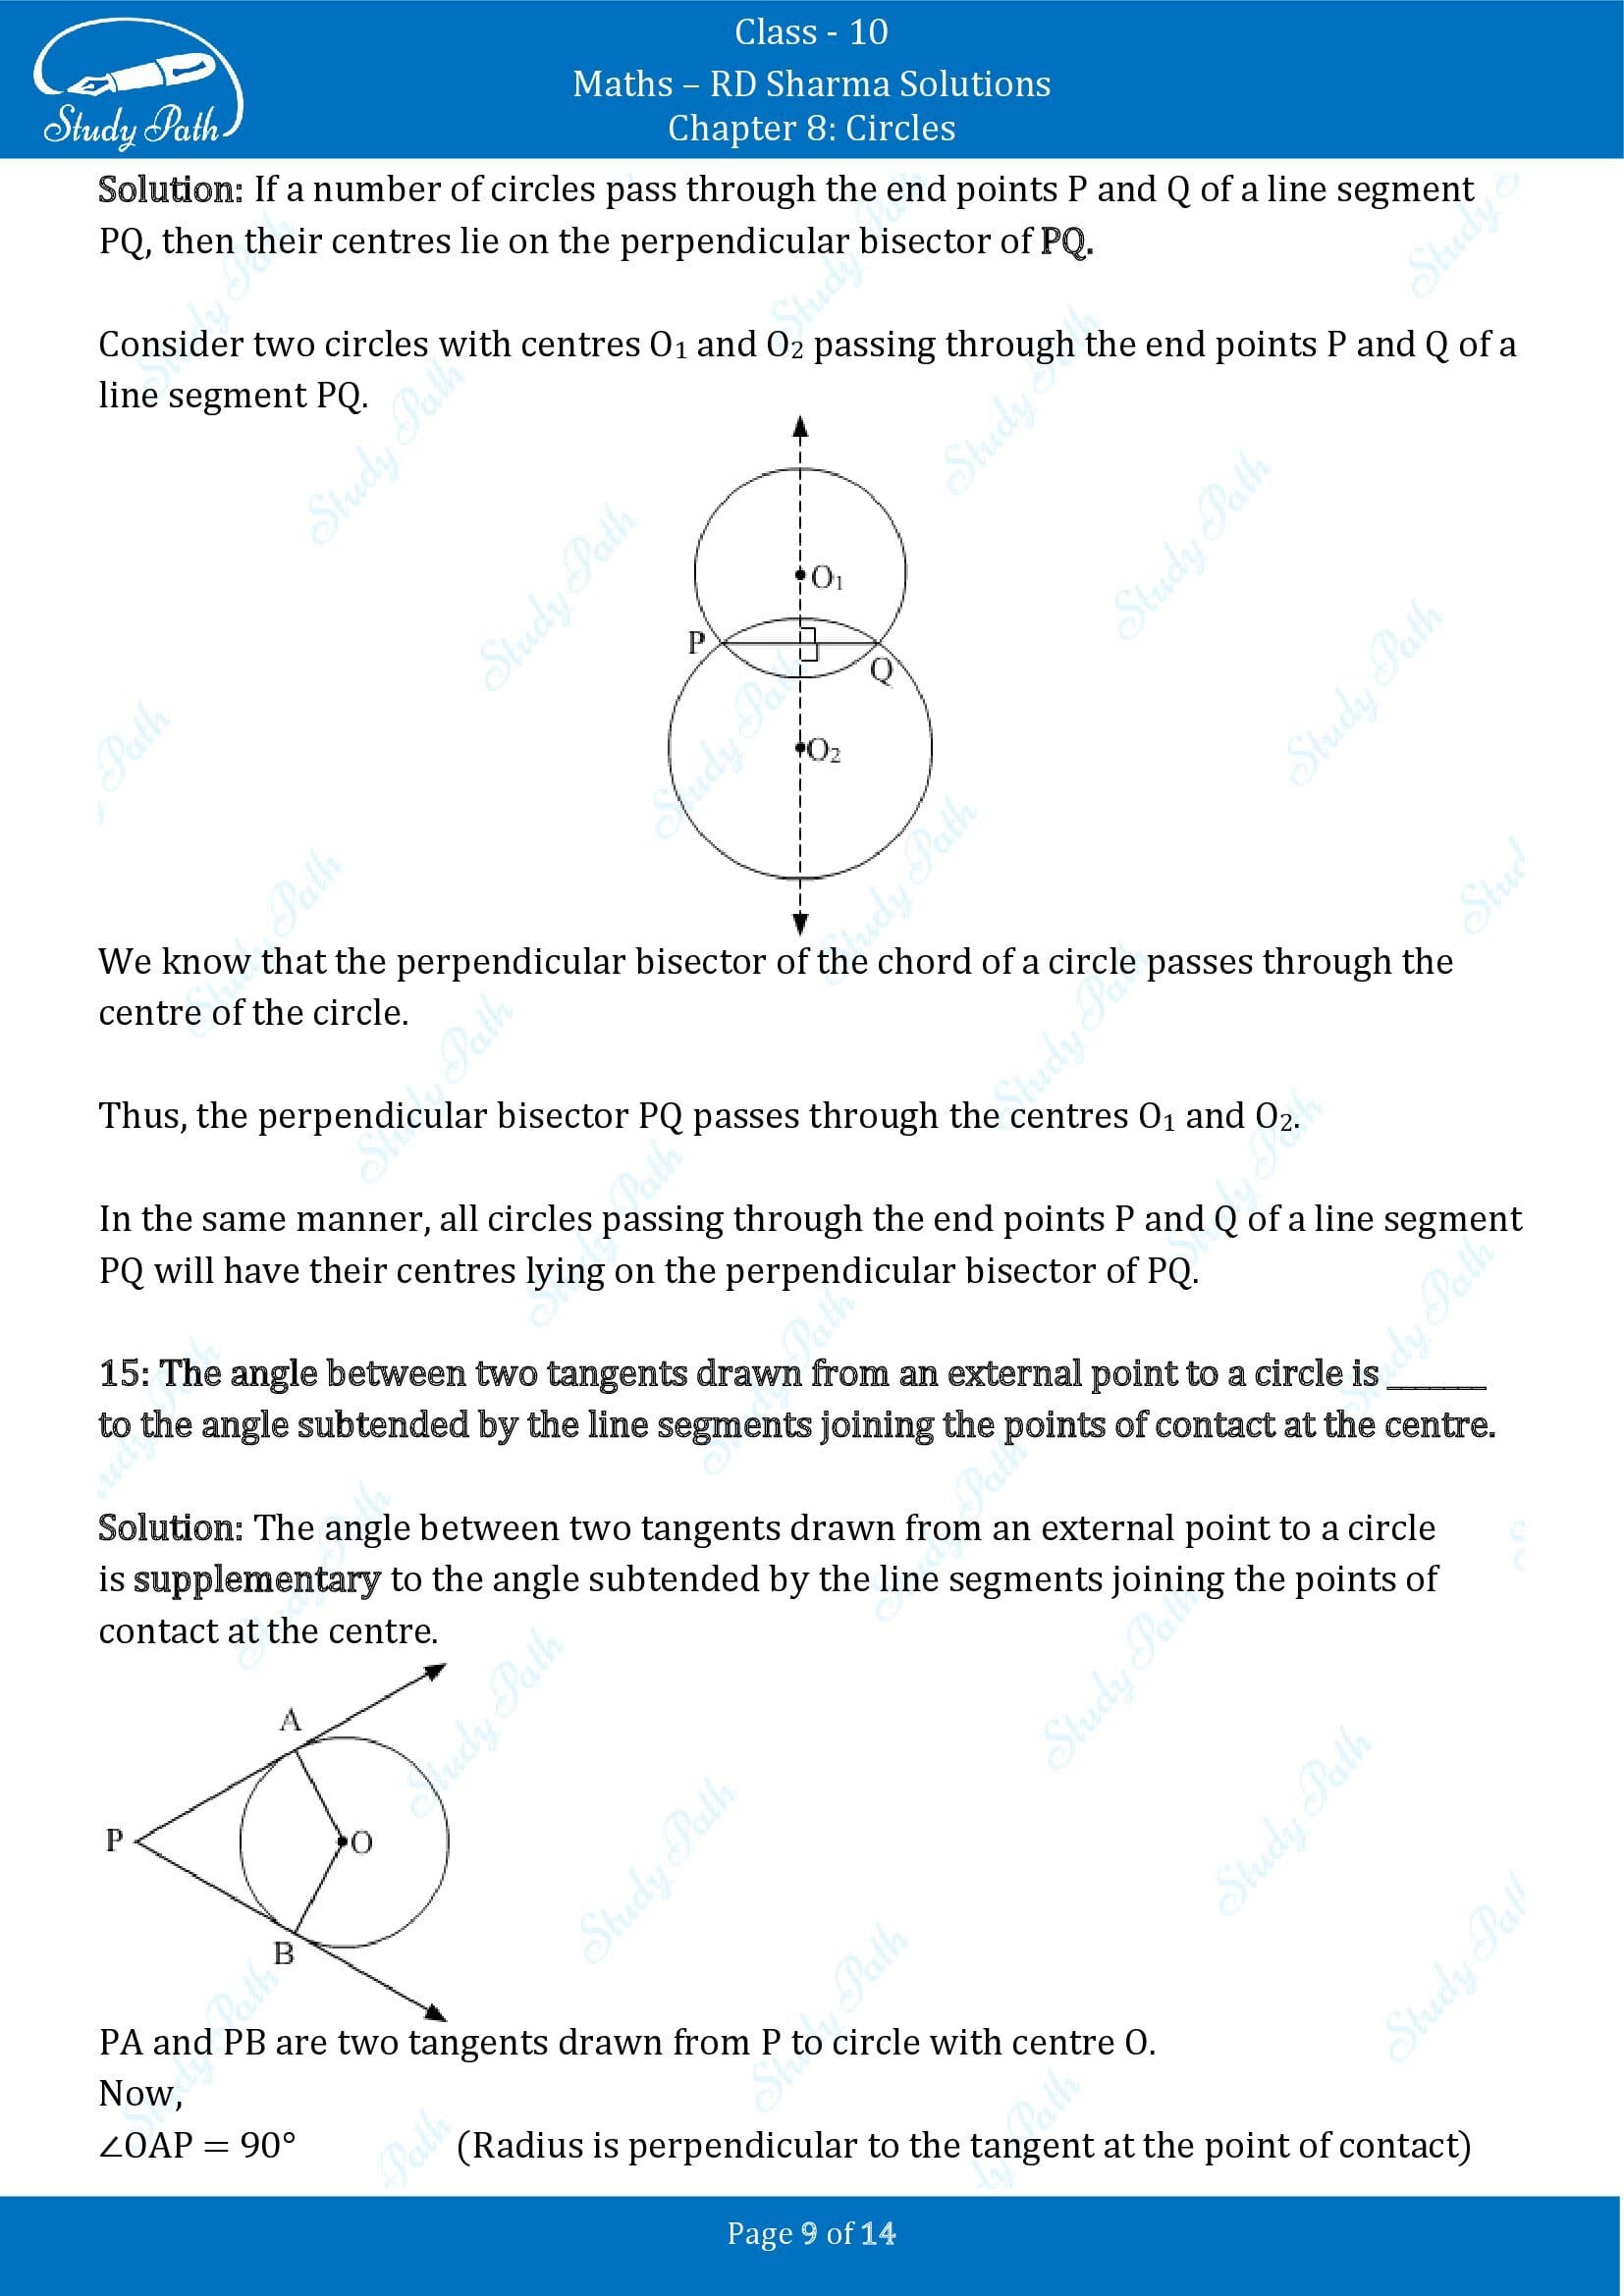 RD Sharma Solutions Class 10 Chapter 8 Circles Fill in the Blank Type Questions FBQs 00009